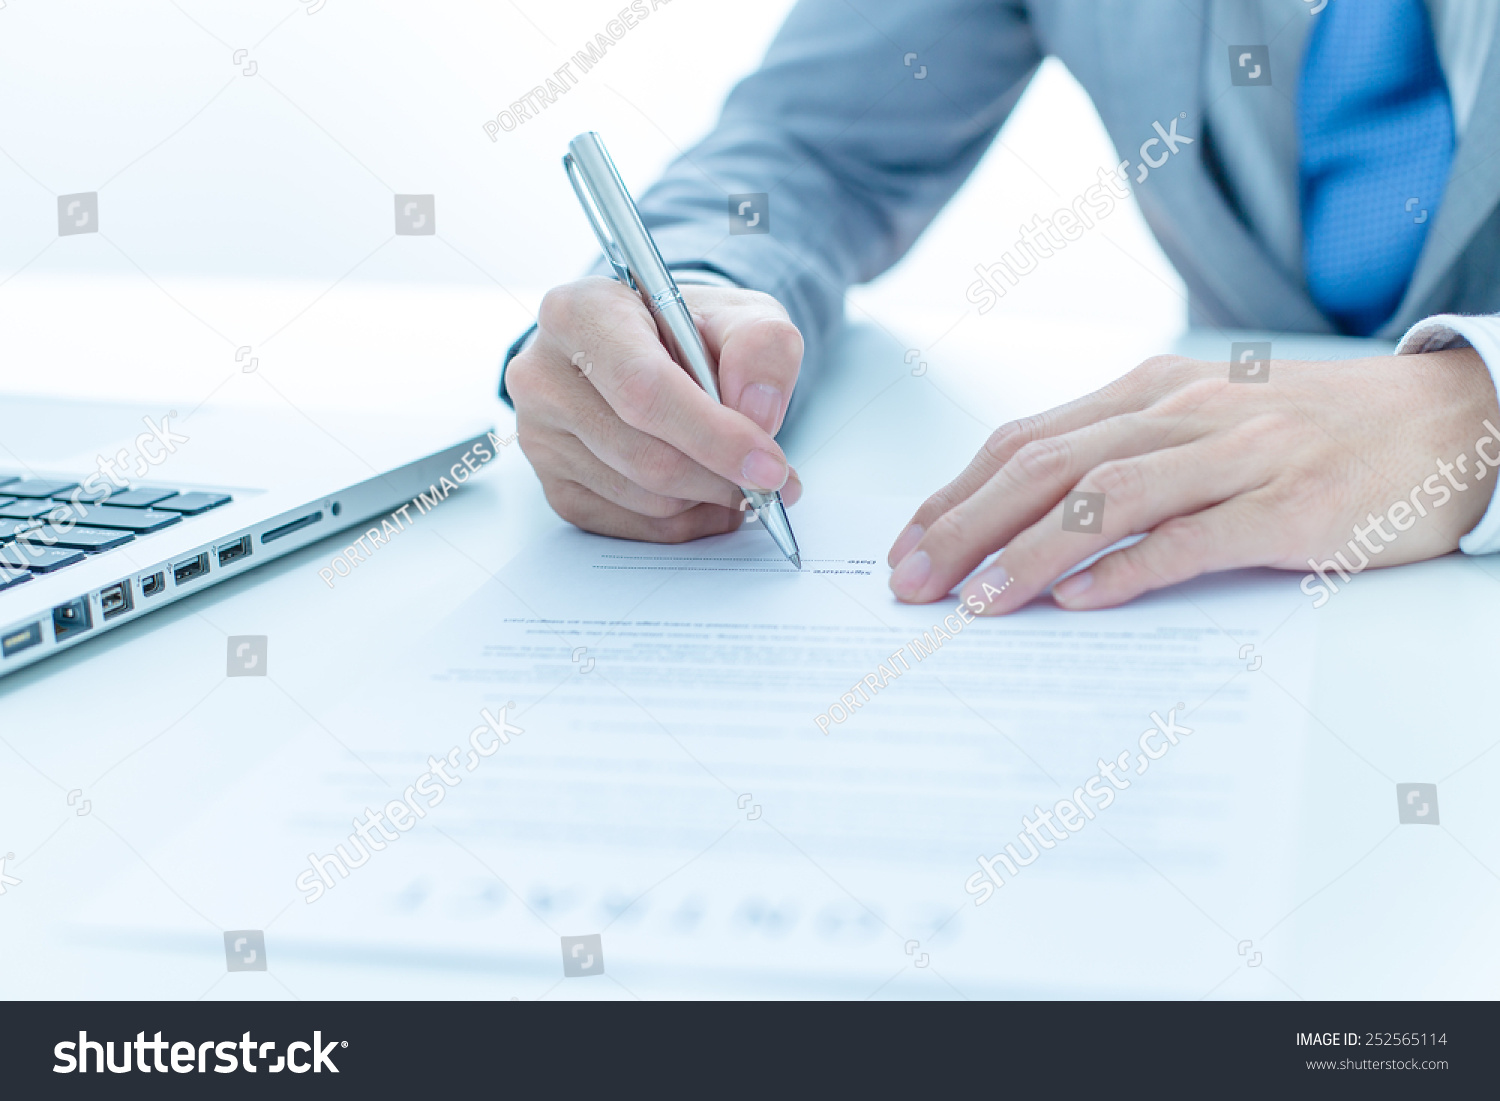 Business Man Signing A Contract Stock Photo 252565114 : Shutterstock